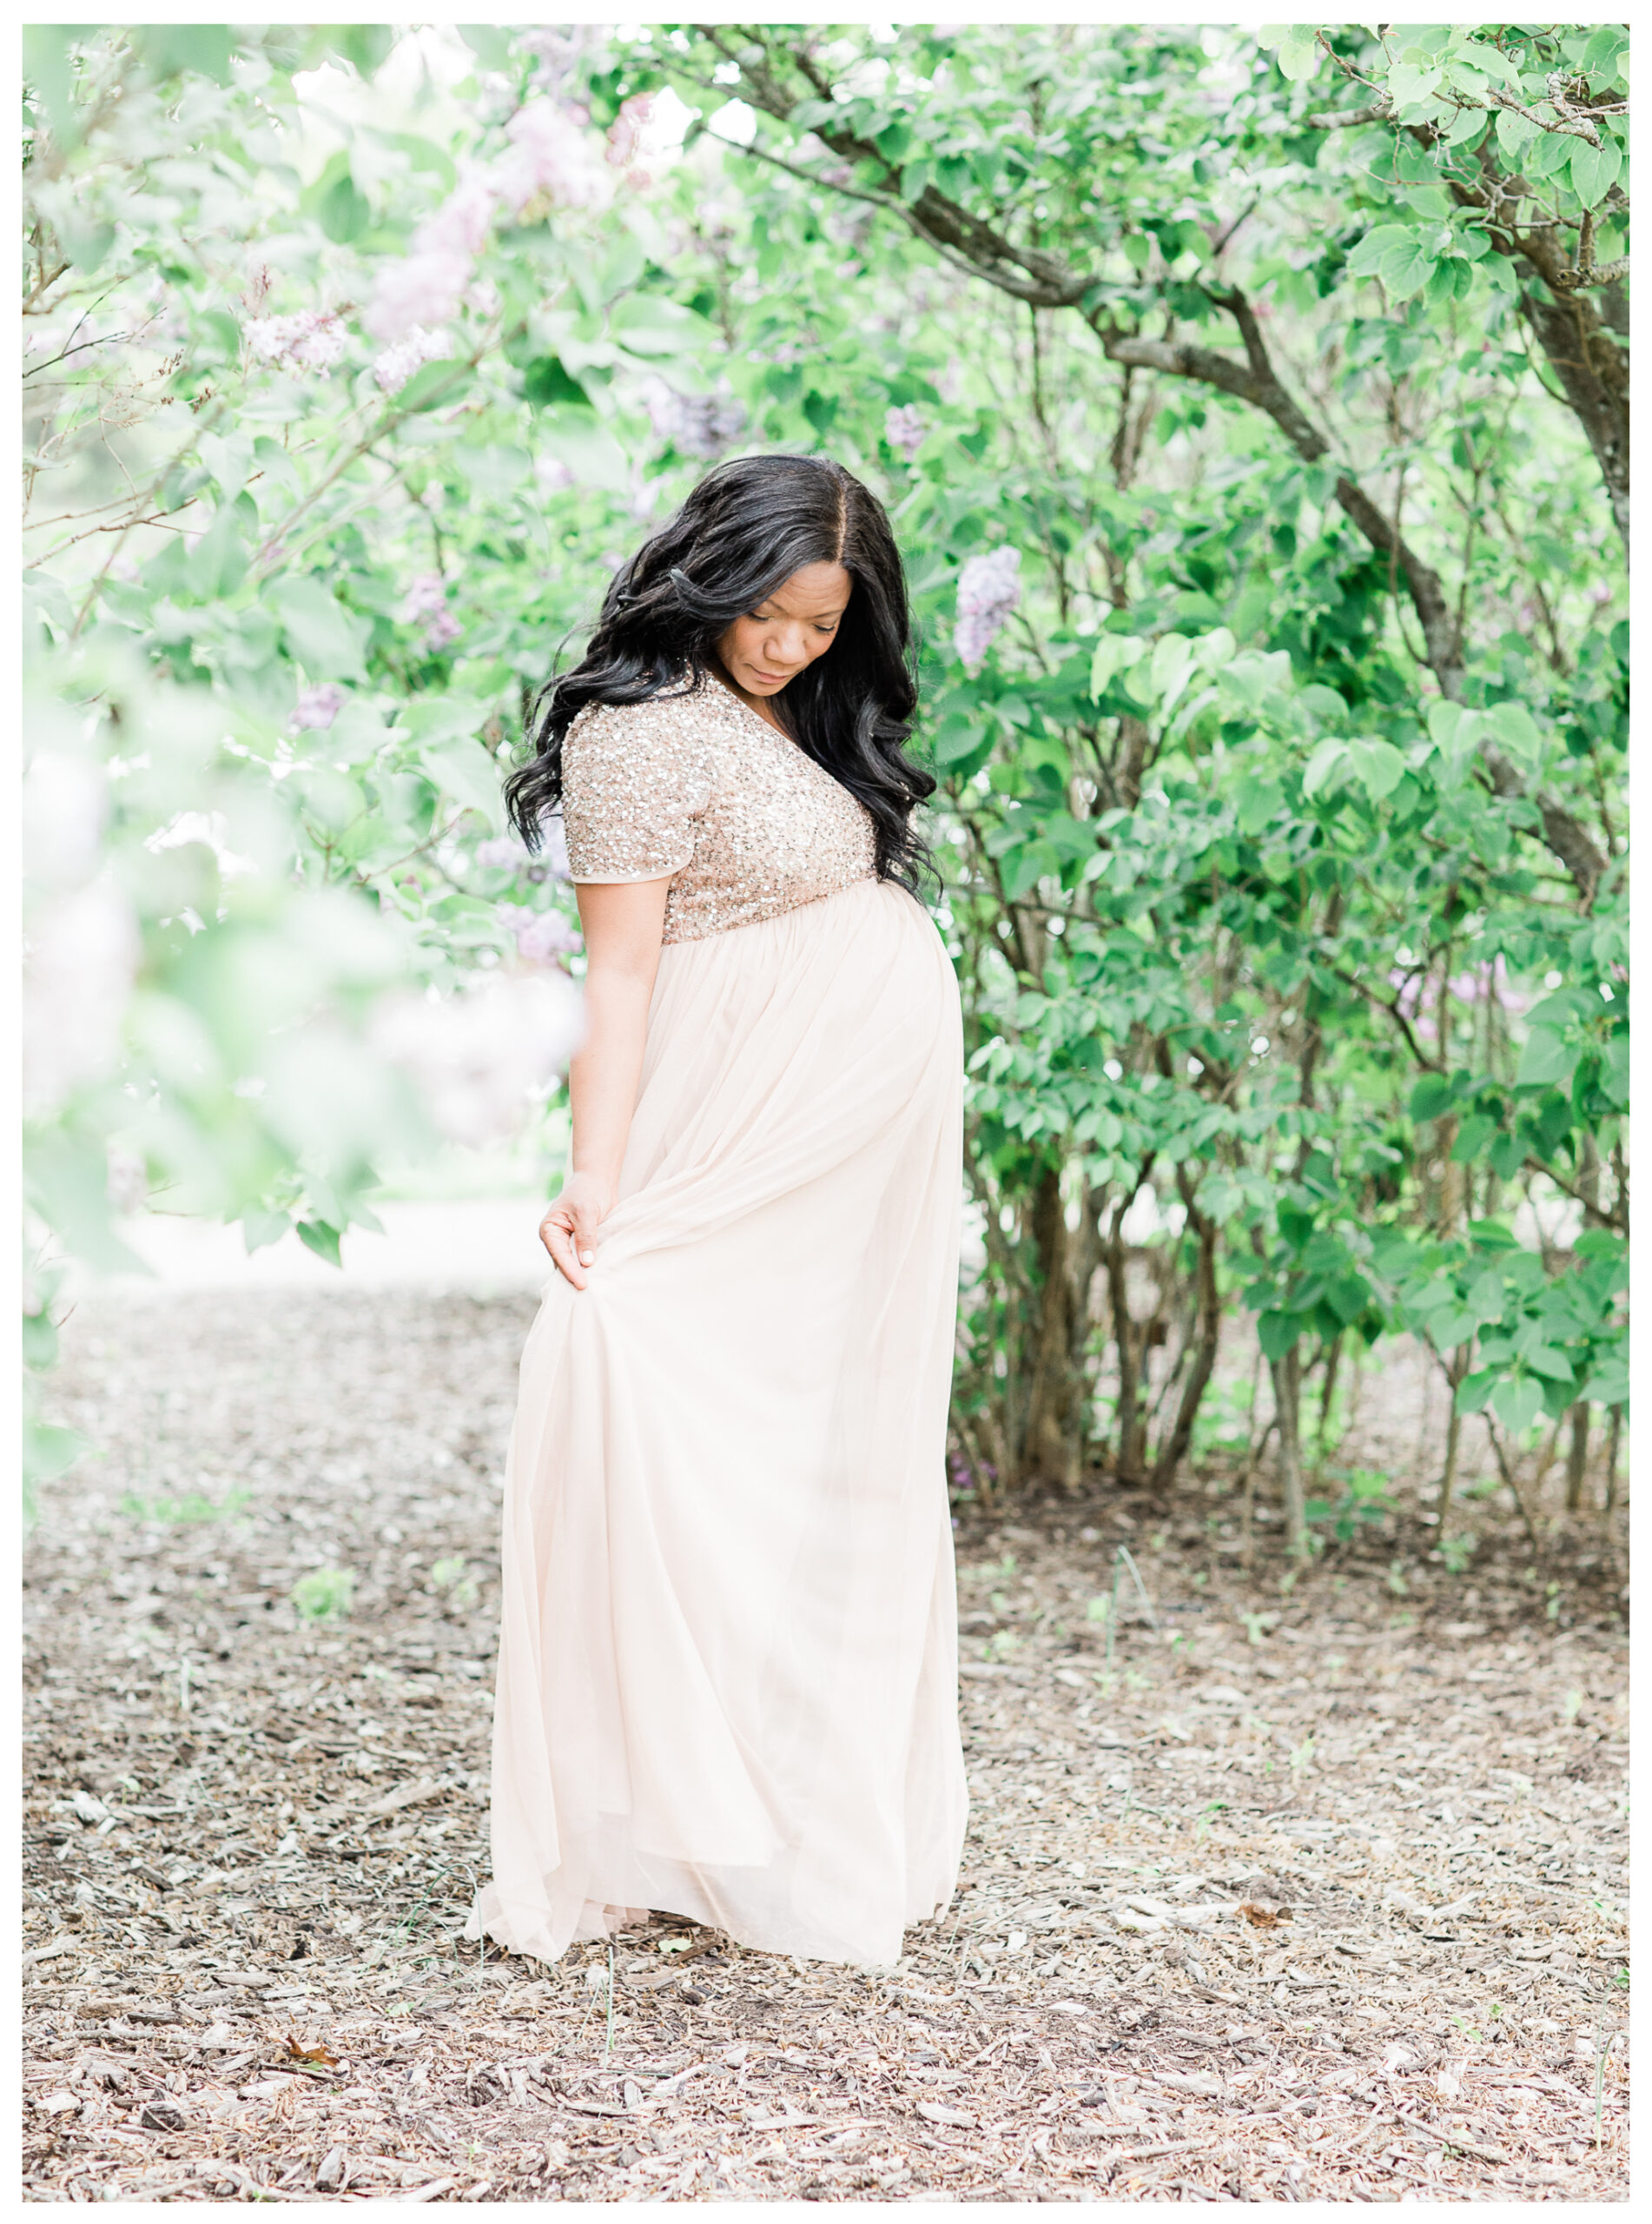 Dayton Maternity Photography | Winter Freire Photography | Dayton, Ohio Photographer | Organic Maternity Spring Session Centerville, OH | Timeless Organic Maternity Portraits